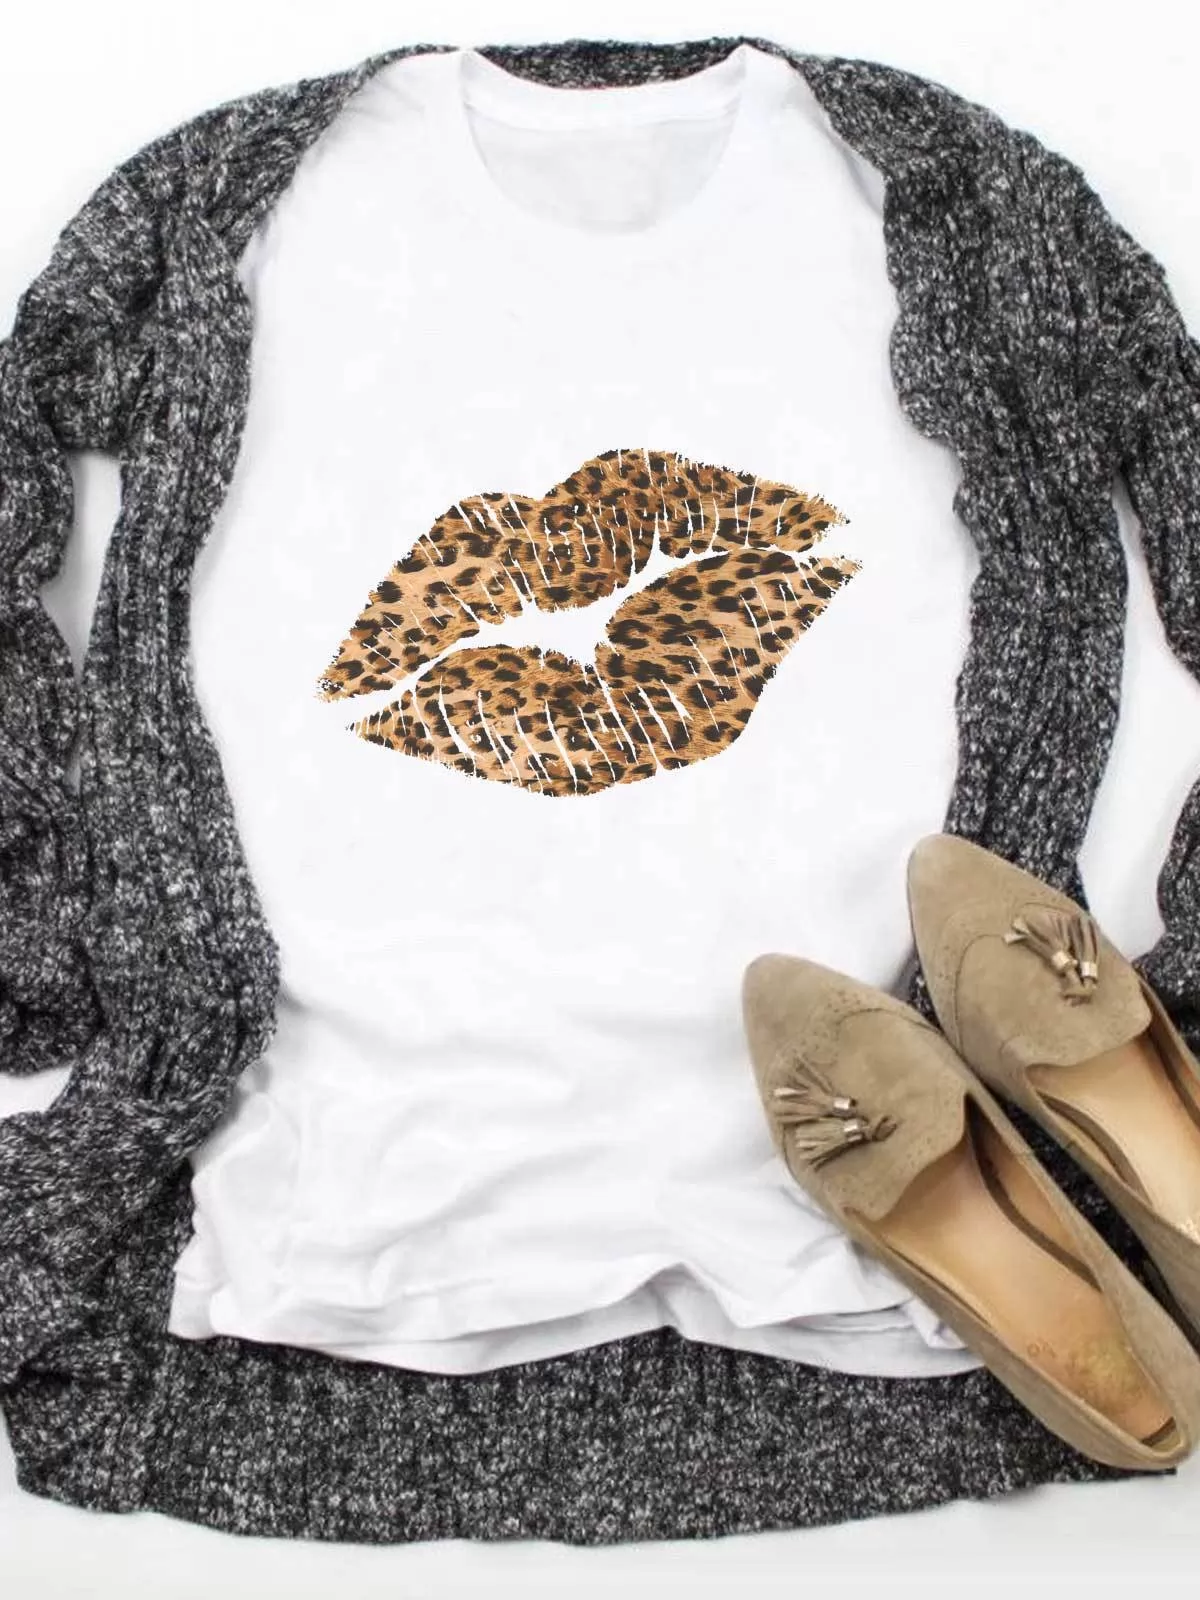 Leopard Lips Textures Printed White Tee